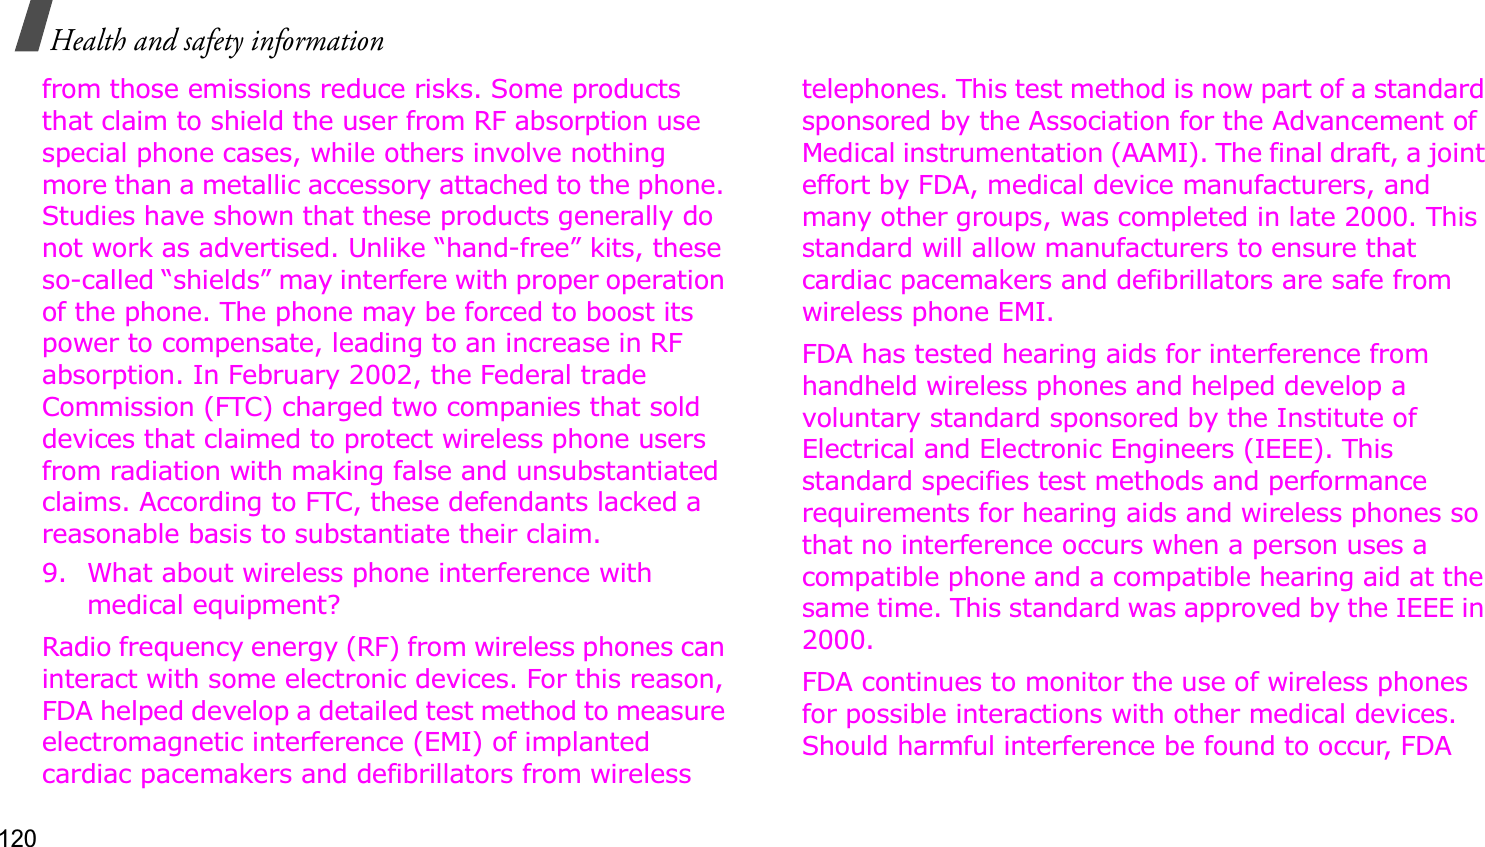 120Health and safety informationfrom those emissions reduce risks. Some products that claim to shield the user from RF absorption use special phone cases, while others involve nothing more than a metallic accessory attached to the phone. Studies have shown that these products generally do not work as advertised. Unlike “hand-free” kits, these so-called “shields” may interfere with proper operation of the phone. The phone may be forced to boost its power to compensate, leading to an increase in RF absorption. In February 2002, the Federal trade Commission (FTC) charged two companies that sold devices that claimed to protect wireless phone users from radiation with making false and unsubstantiated claims. According to FTC, these defendants lacked a reasonable basis to substantiate their claim.9. What about wireless phone interference with medical equipment?Radio frequency energy (RF) from wireless phones can interact with some electronic devices. For this reason, FDA helped develop a detailed test method to measure electromagnetic interference (EMI) of implanted cardiac pacemakers and defibrillators from wireless telephones. This test method is now part of a standard sponsored by the Association for the Advancement of Medical instrumentation (AAMI). The final draft, a joint effort by FDA, medical device manufacturers, and many other groups, was completed in late 2000. This standard will allow manufacturers to ensure that cardiac pacemakers and defibrillators are safe from wireless phone EMI.FDA has tested hearing aids for interference from handheld wireless phones and helped develop a voluntary standard sponsored by the Institute of Electrical and Electronic Engineers (IEEE). This standard specifies test methods and performance requirements for hearing aids and wireless phones so that no interference occurs when a person uses a compatible phone and a compatible hearing aid at the same time. This standard was approved by the IEEE in 2000.FDA continues to monitor the use of wireless phones for possible interactions with other medical devices. Should harmful interference be found to occur, FDA 